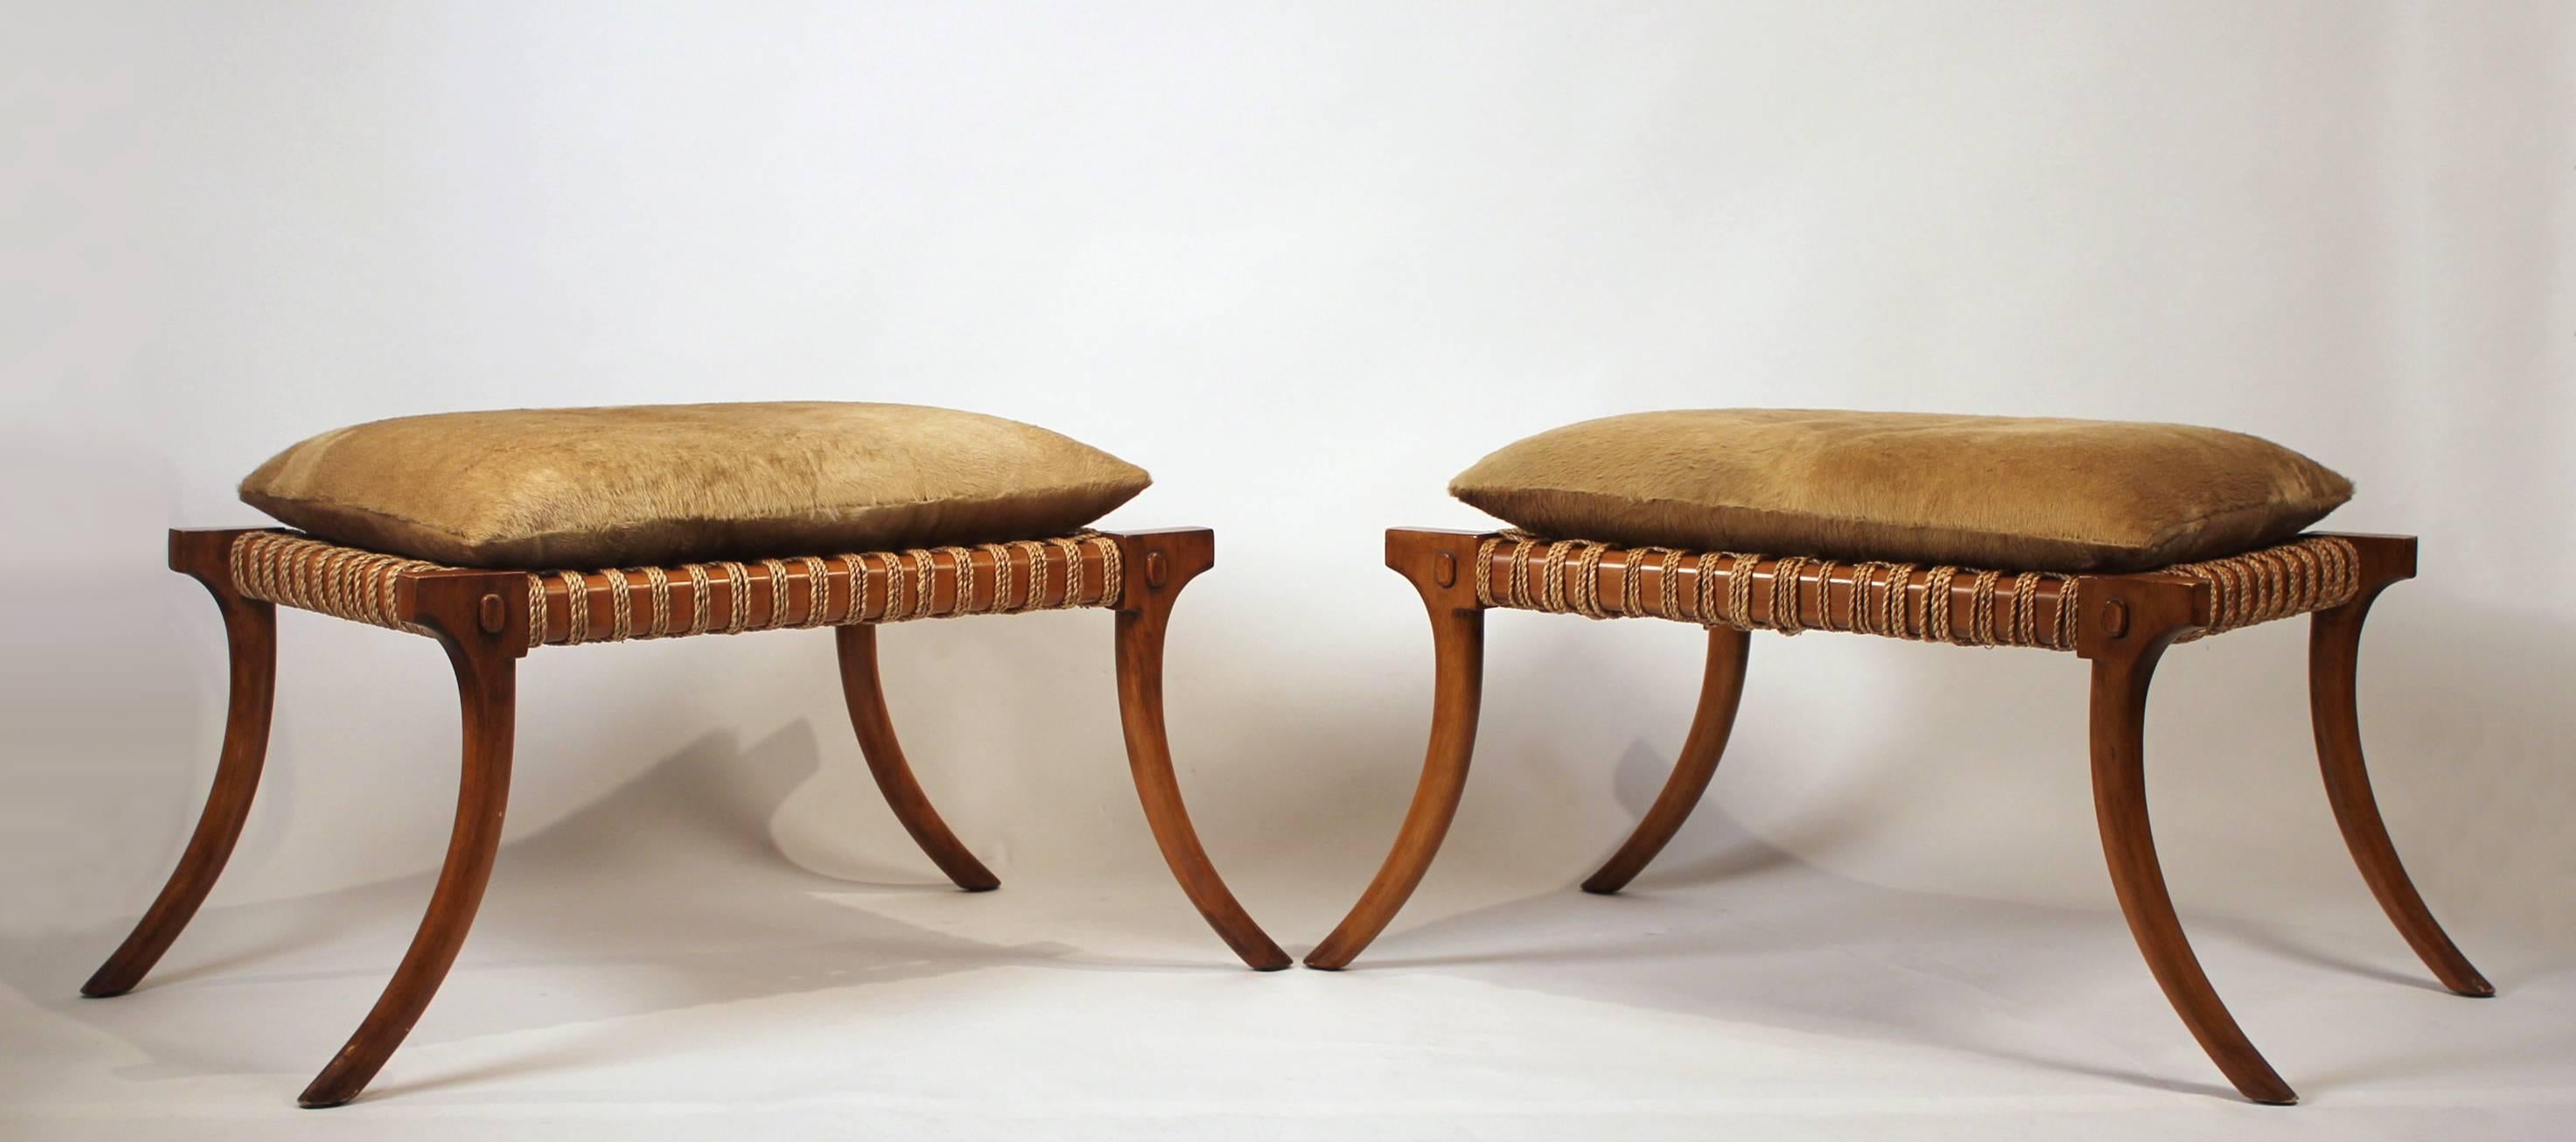 Large-scale pair of 1960s vintage Klismos stools wrapped in cording with hair on hide cushions. In the style of T.H. Robsjohn-Gibbings for Saridis of Athens. 

Measure: The height without the cushion is 17.5